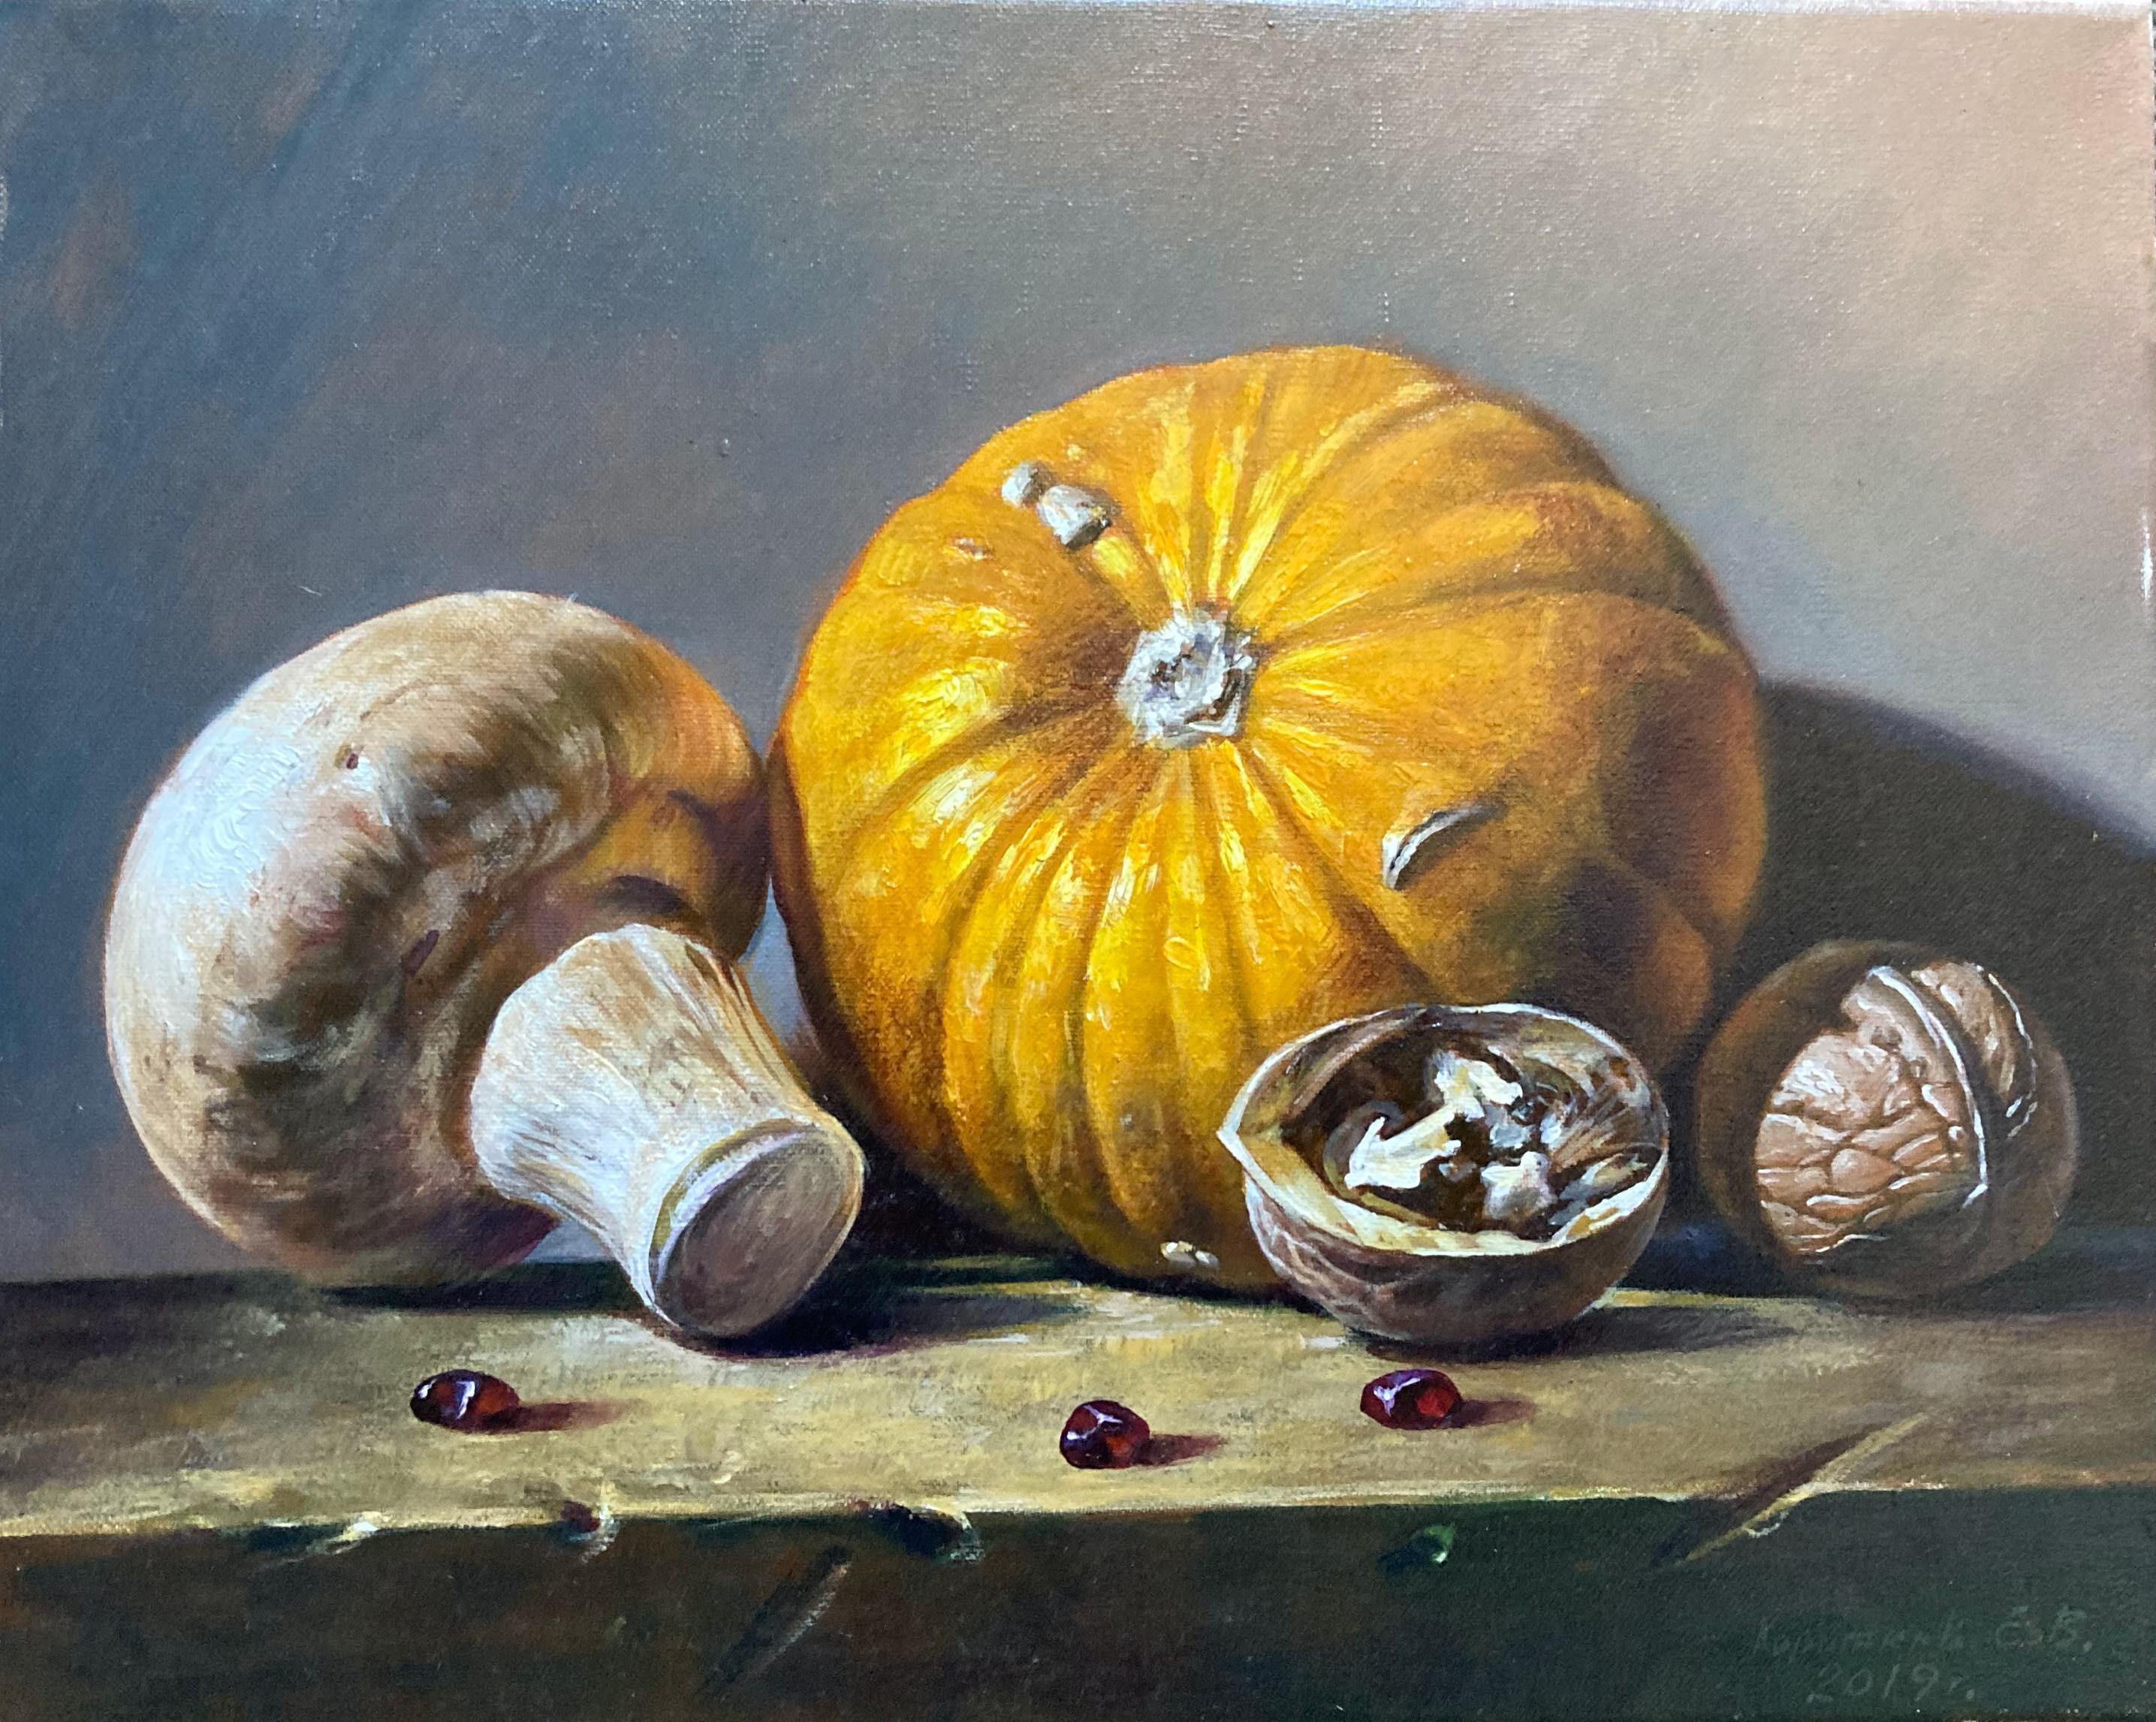 The Fruits of Autumn (Small Contemporary Still Life Oil Painting)